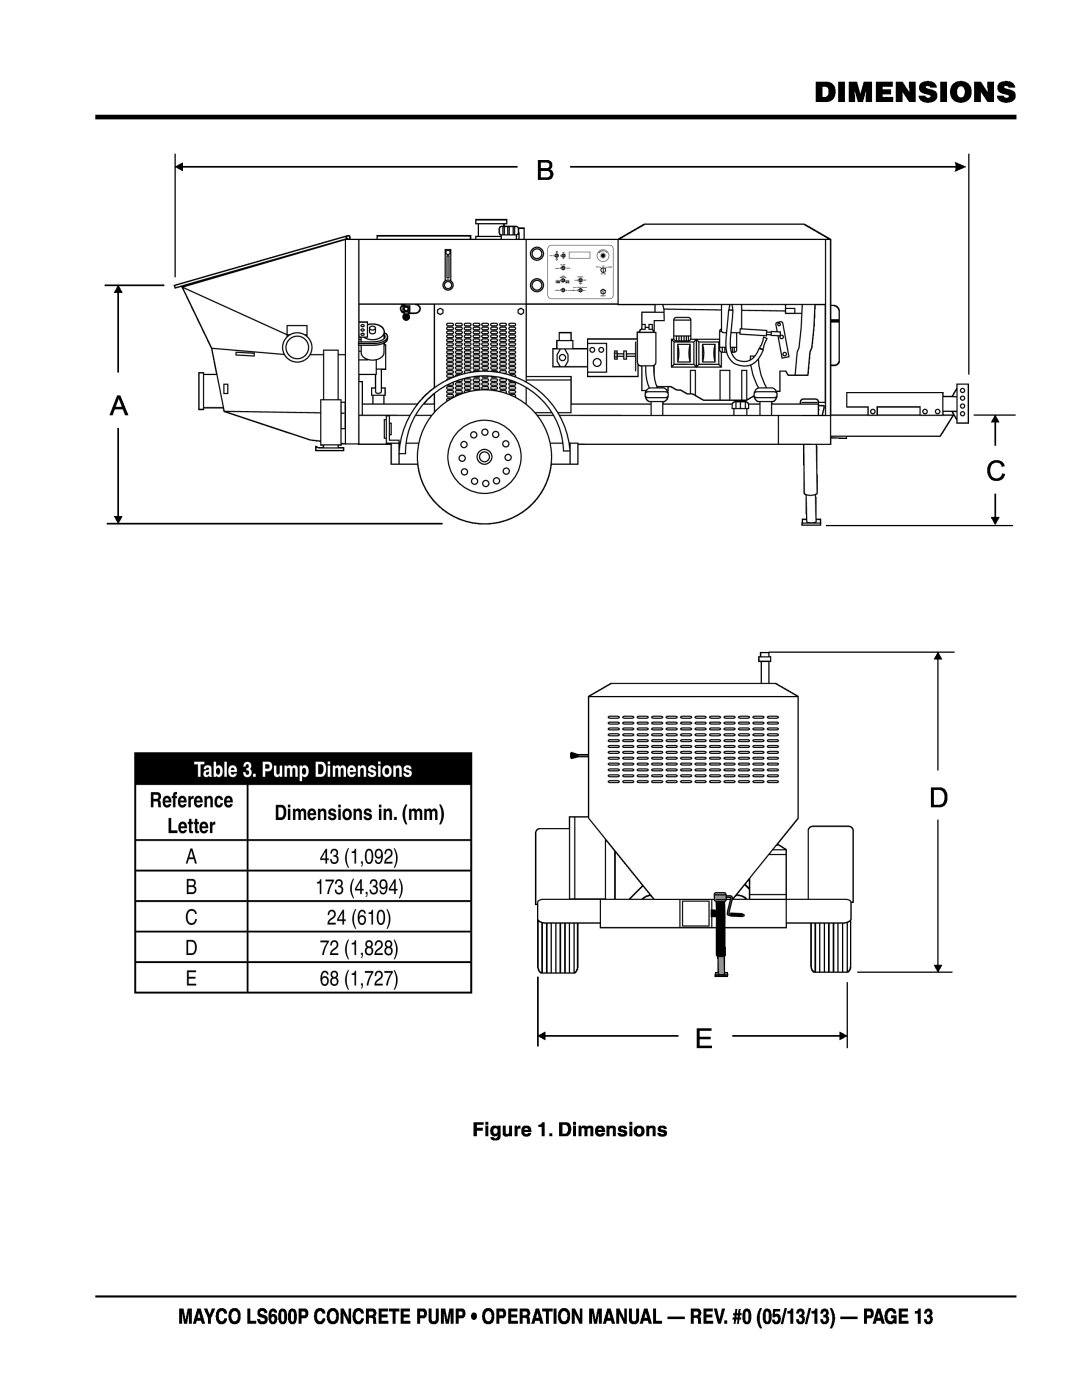 Multiquip LS600P operation manual dimensions, Pump Dimensions, Reference Dimensions in. mm Letter 